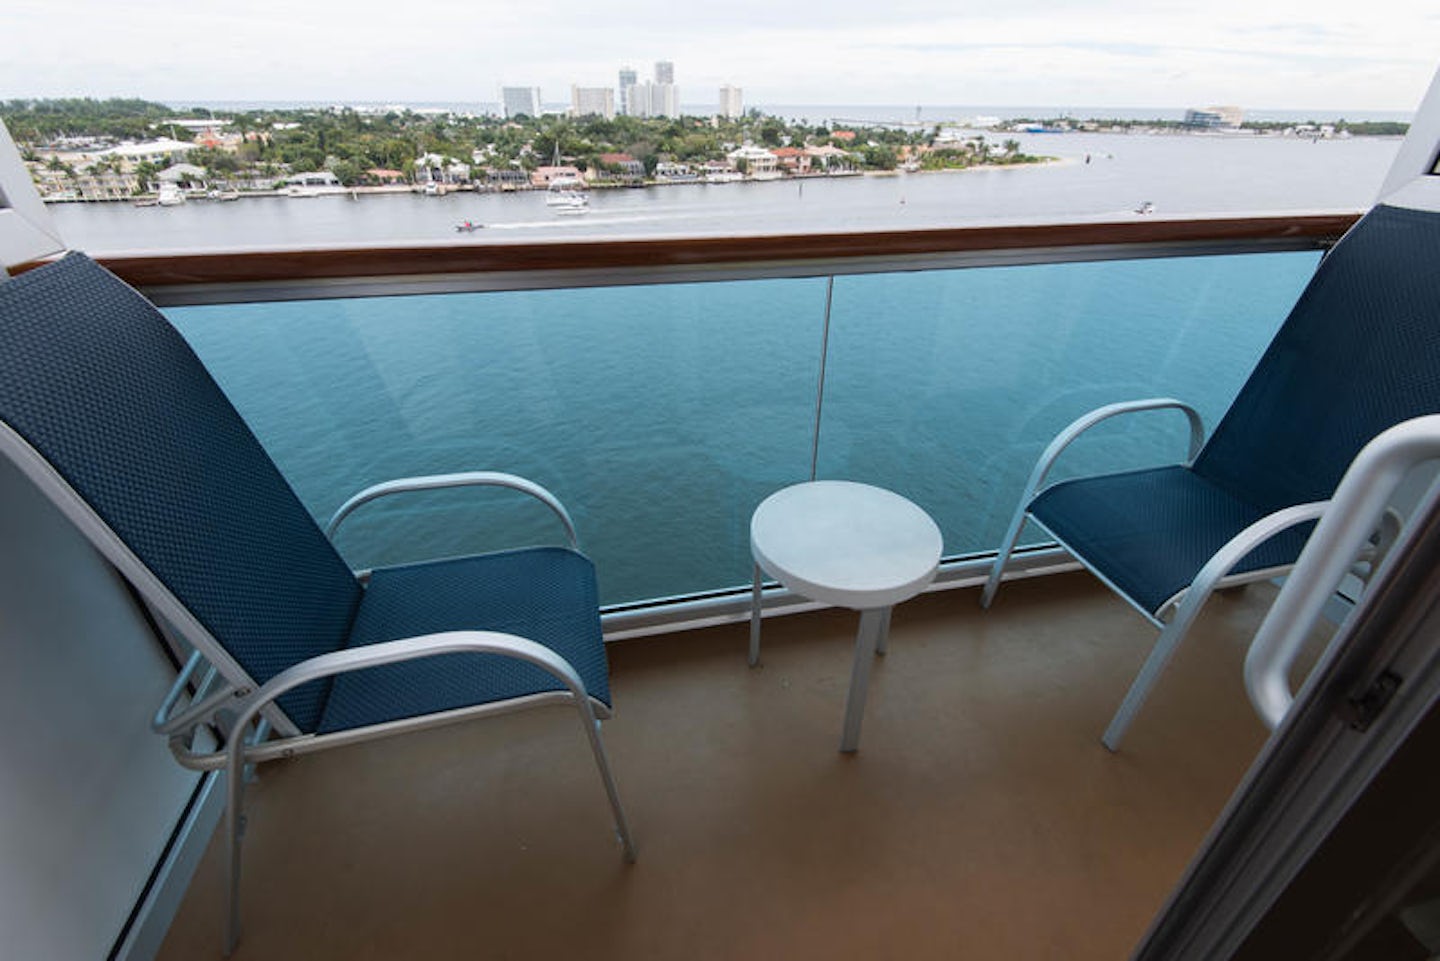 do cruise ships have balconies